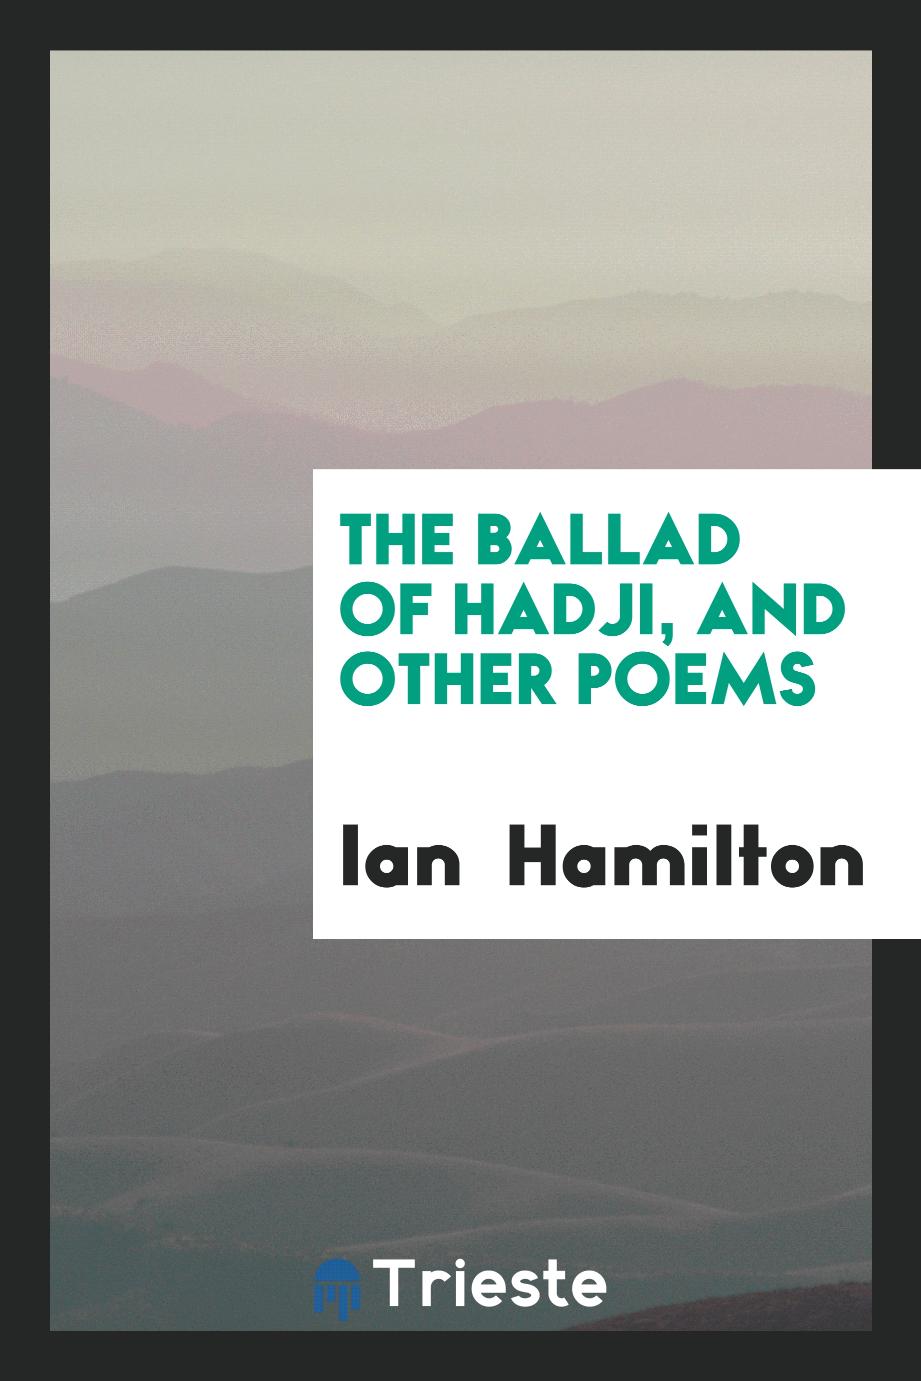 The Ballad of Hadji, And Other Poems